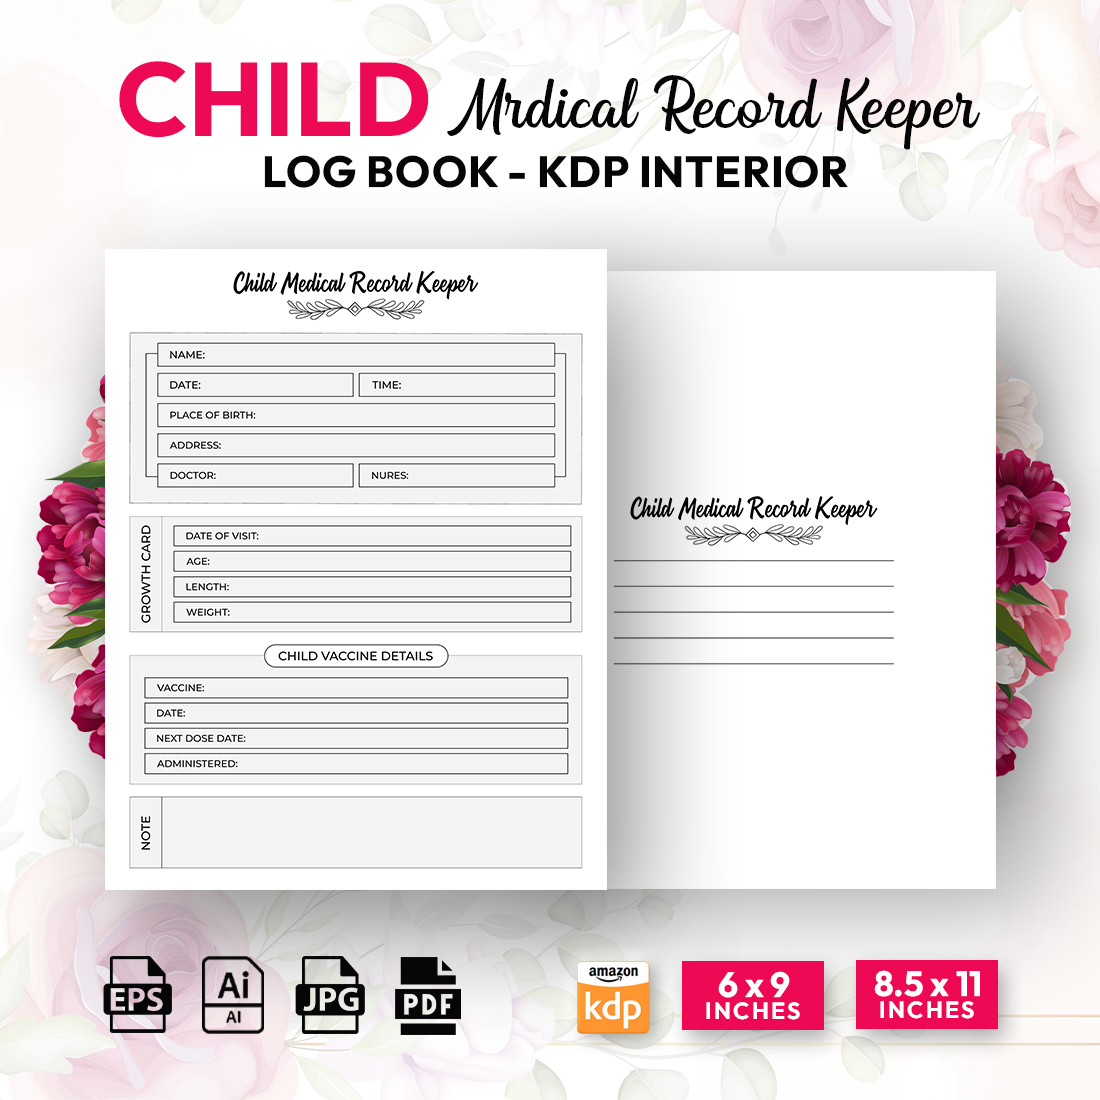 Child Medical Record Keeper Logbook – Low Content KDP Interior cover image.